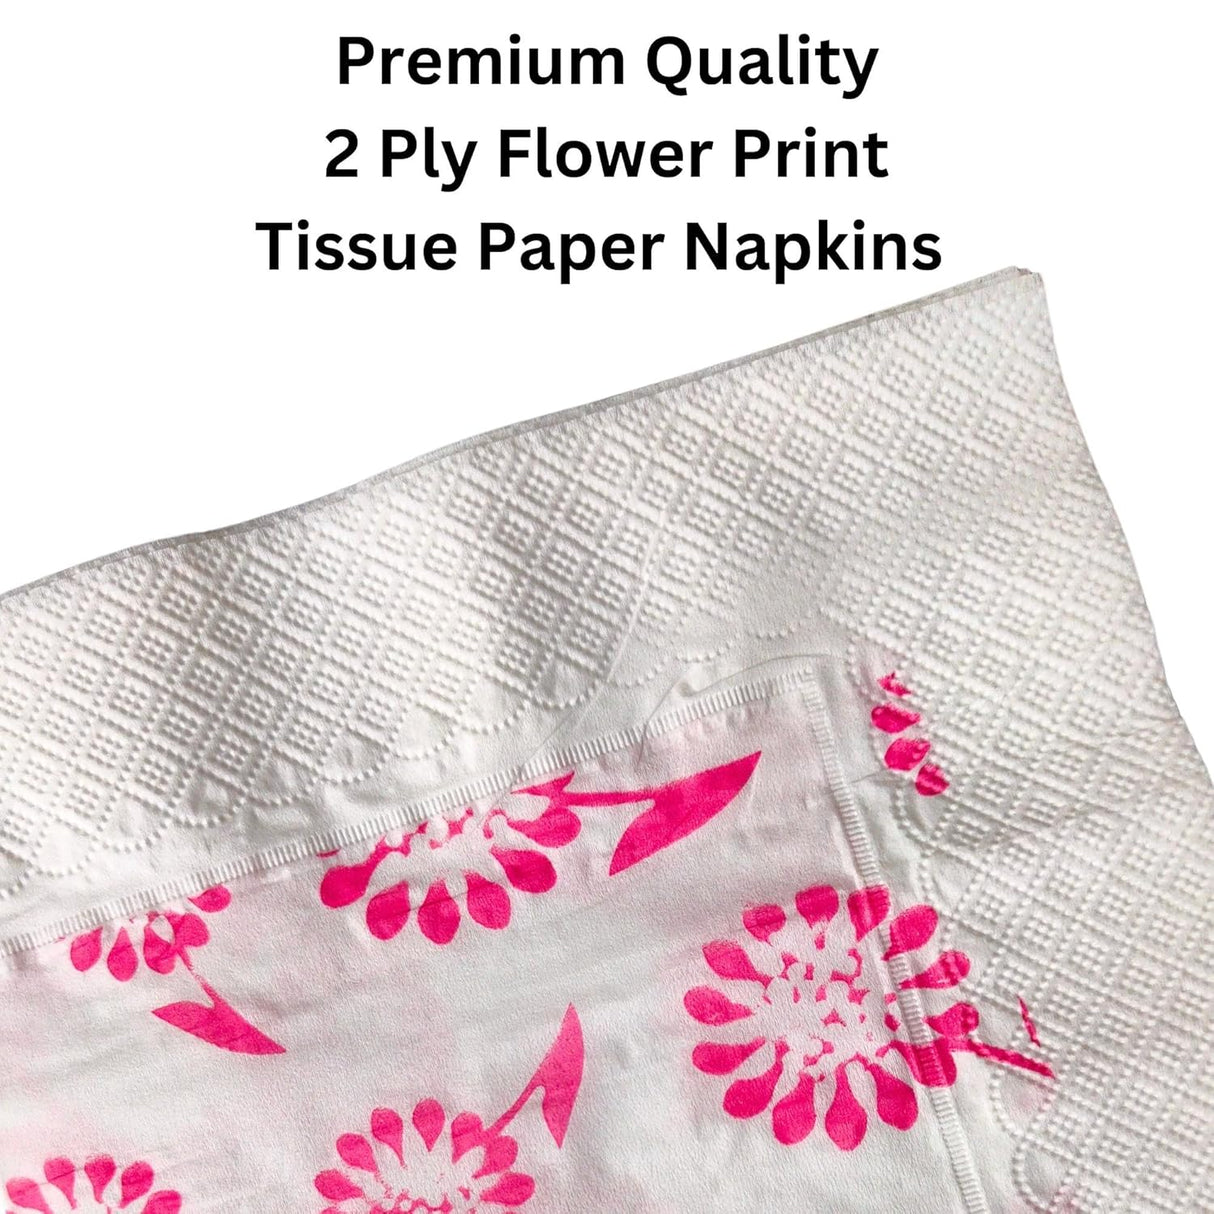 Singhal 2 Ply Tissue Paper Napkins Printed 33x33 - Pack of 1 (50 Pulls Per Pack, 50 Sheets)